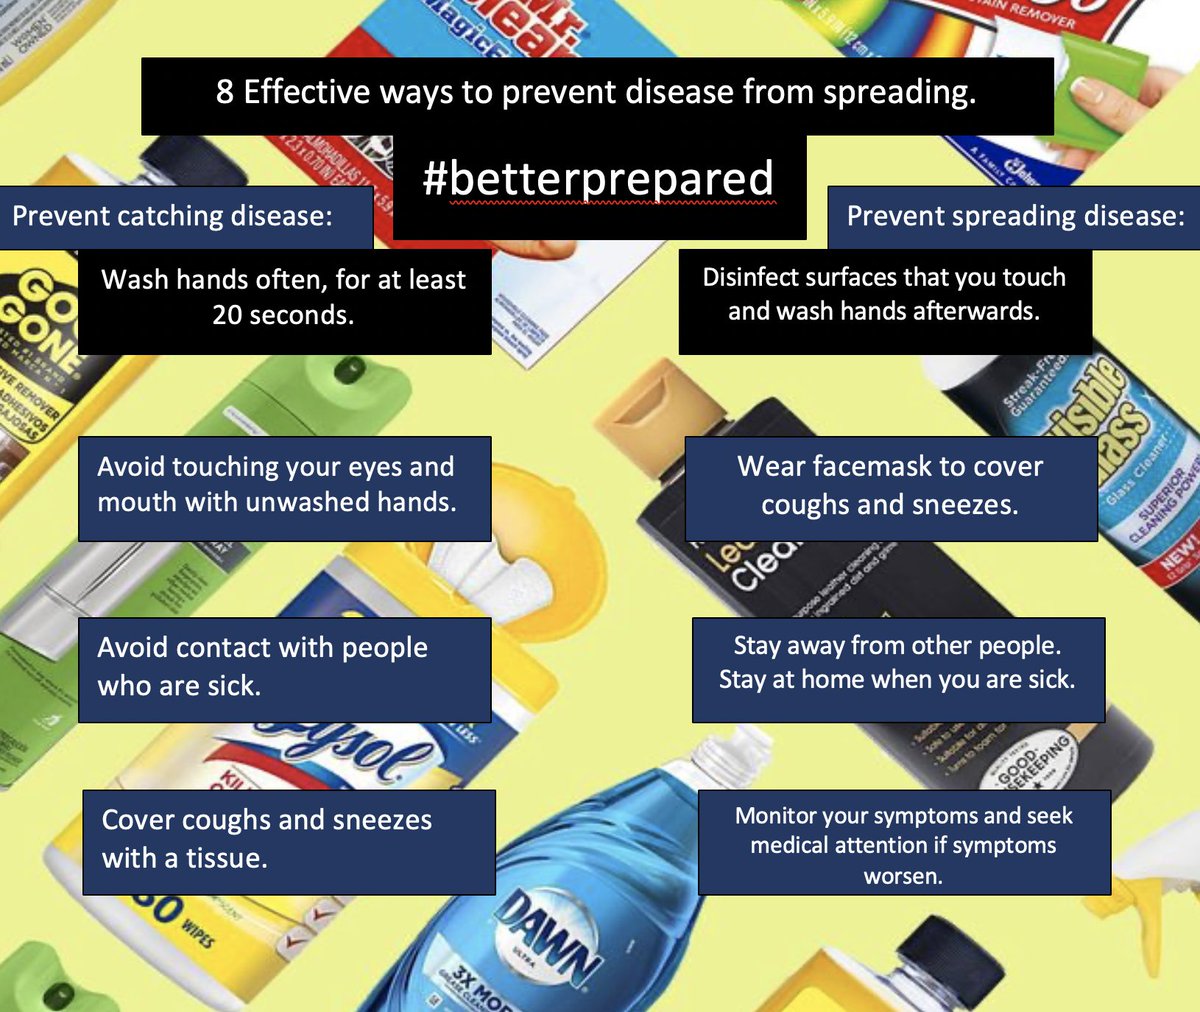 Prevent another pandemic! Do your duty in preventing the spread of disease! #betterprepared